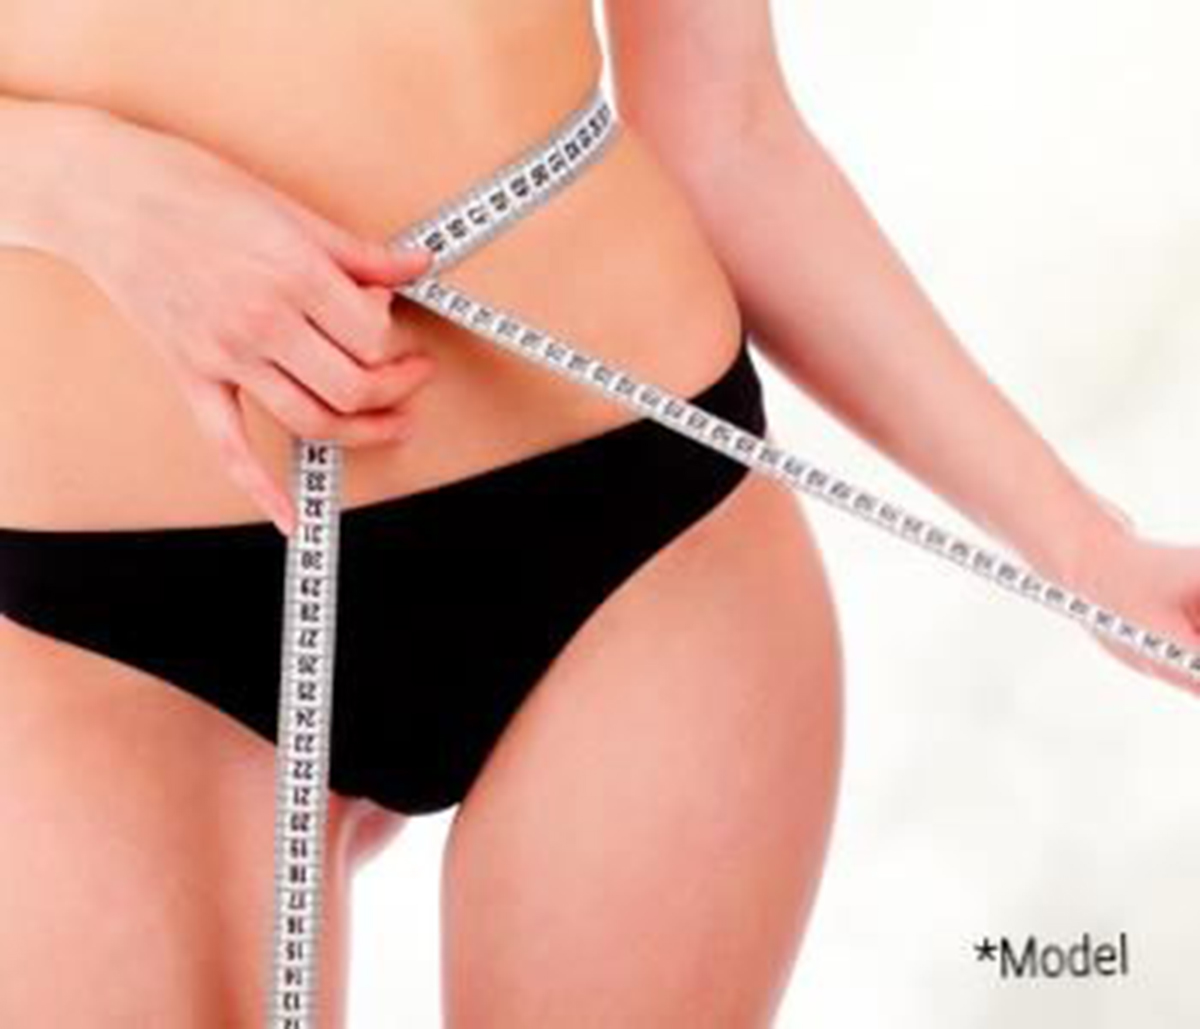 Reduce unwanted fat in a less invasive way with Smartlipo procedures from plastic surgeon in Beverly Hills